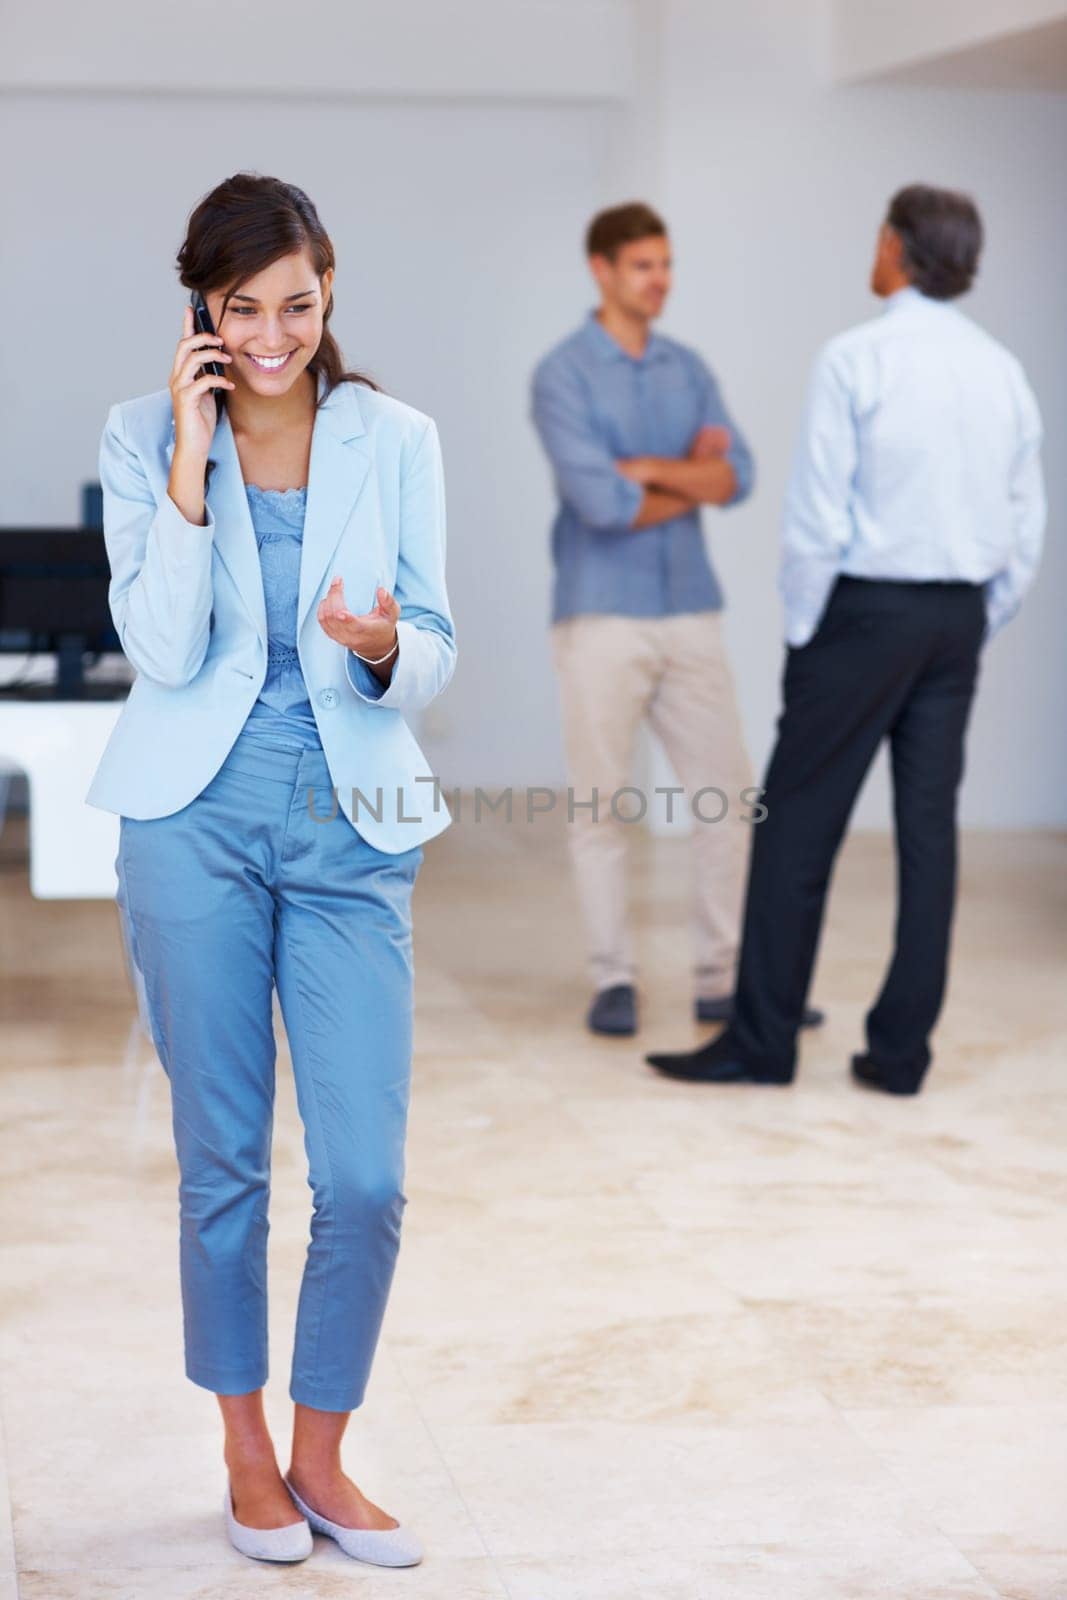 Business woman speaking on cellphone. Full length of happy business woman speaking on cellphone with colleagues in background